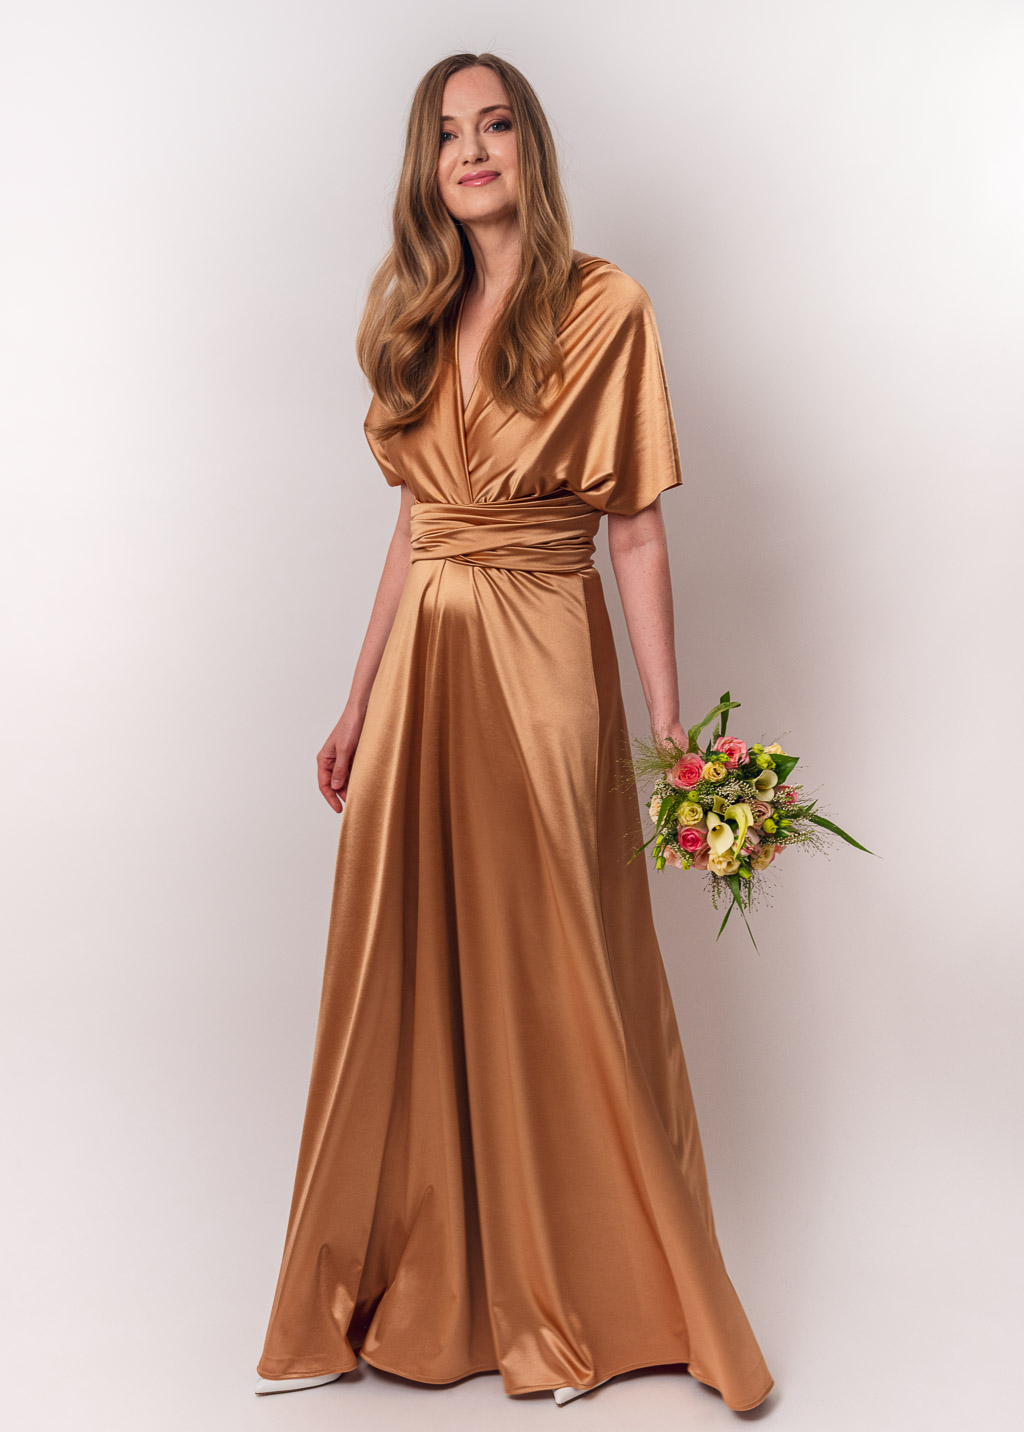 Gold luxury satin infinity dress or jumpsuit